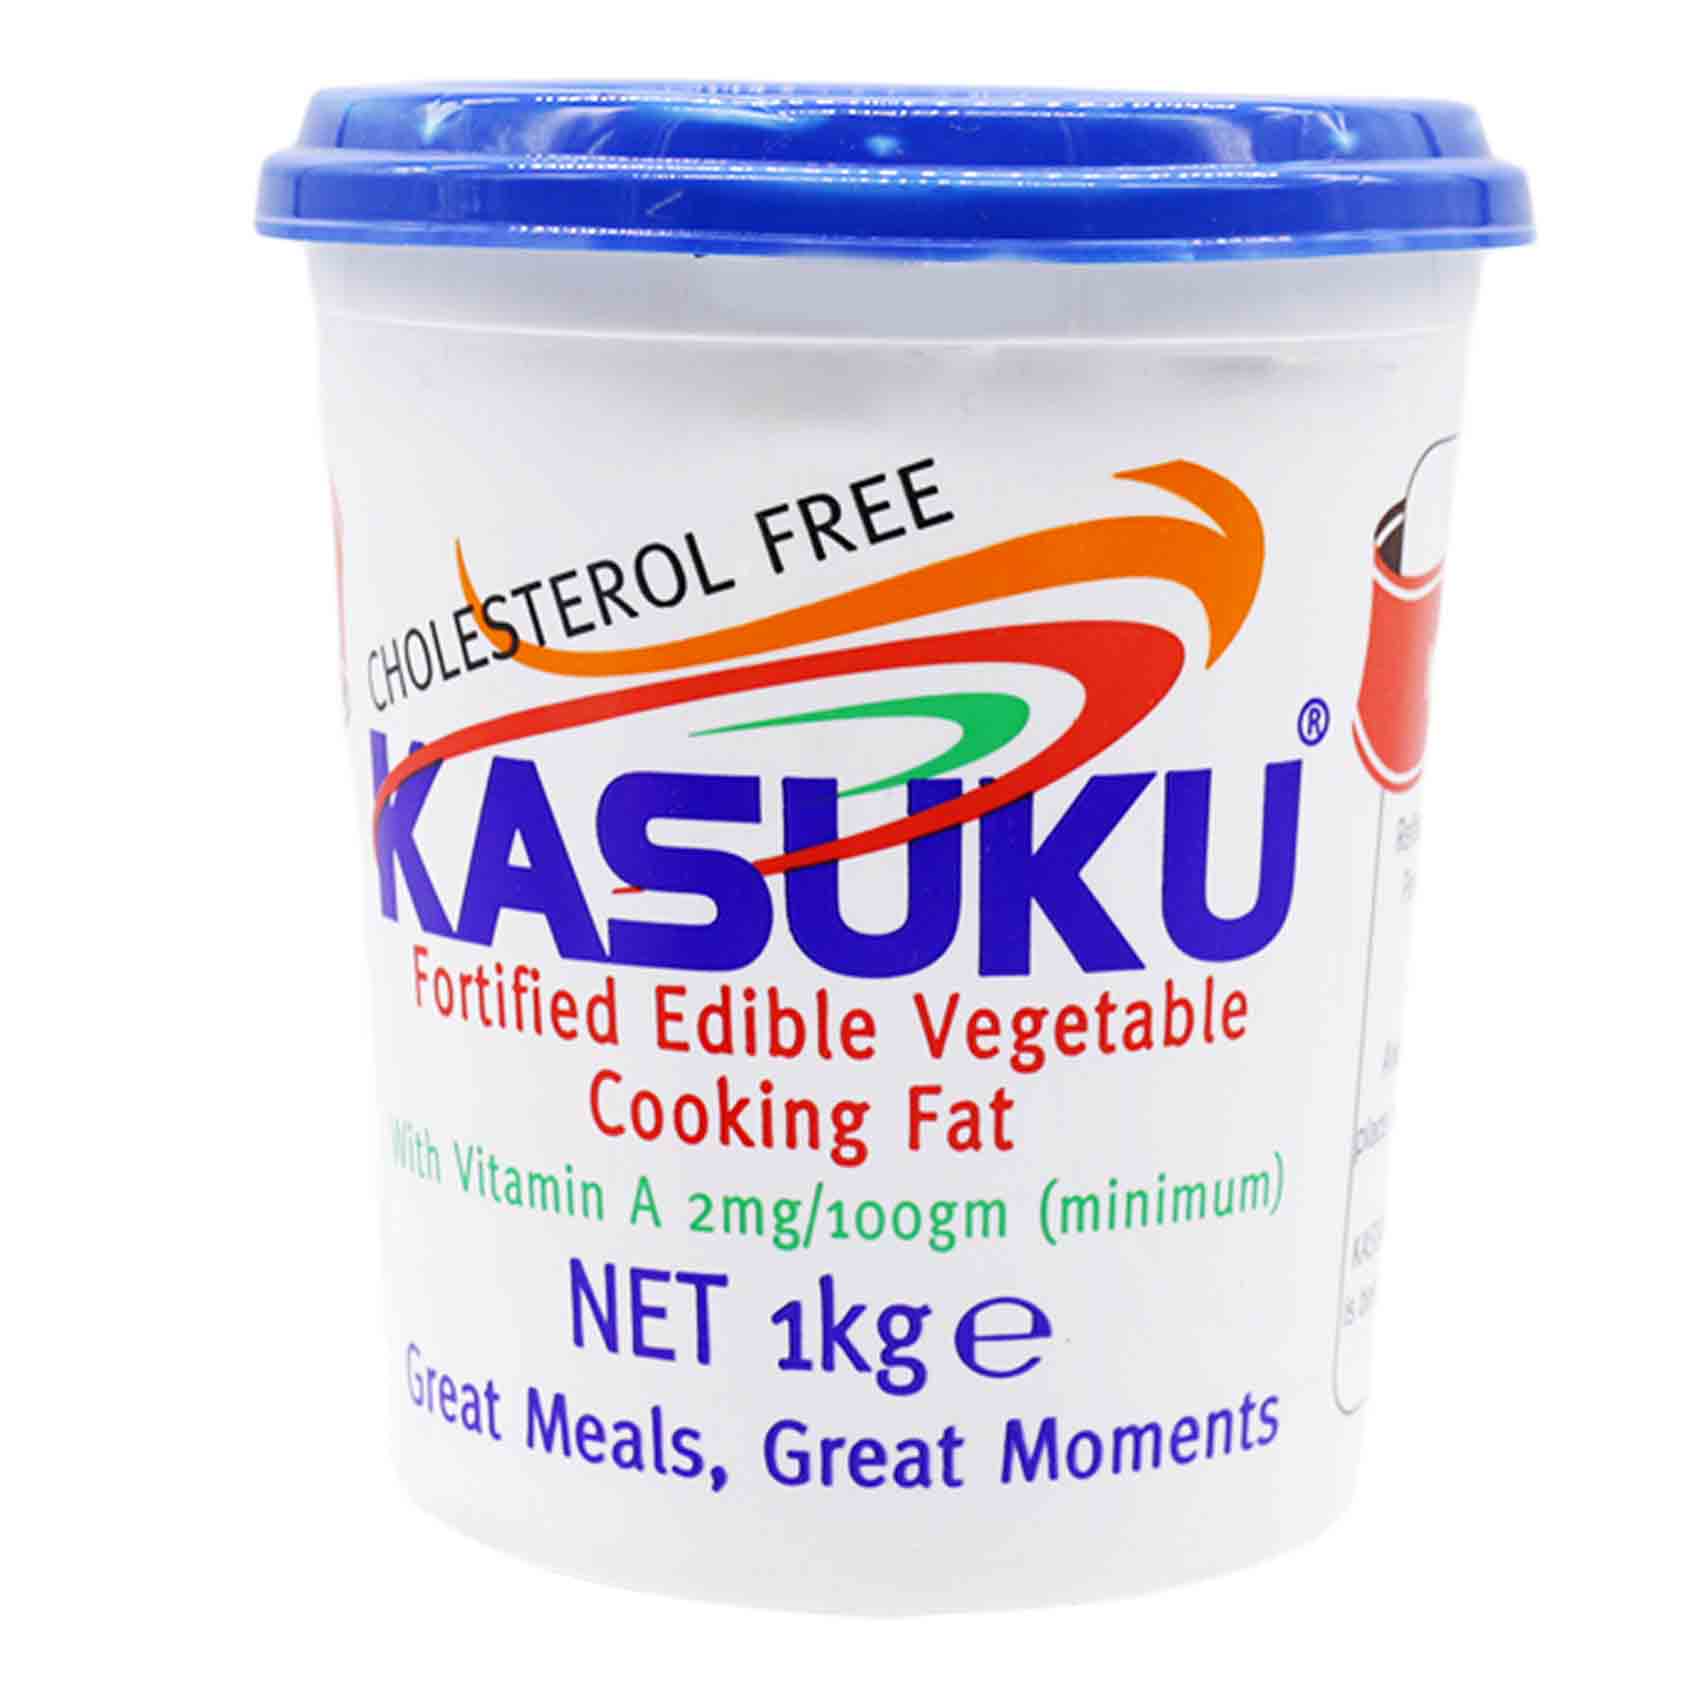 Kasuku Pure White Cooking Fat 1Kg